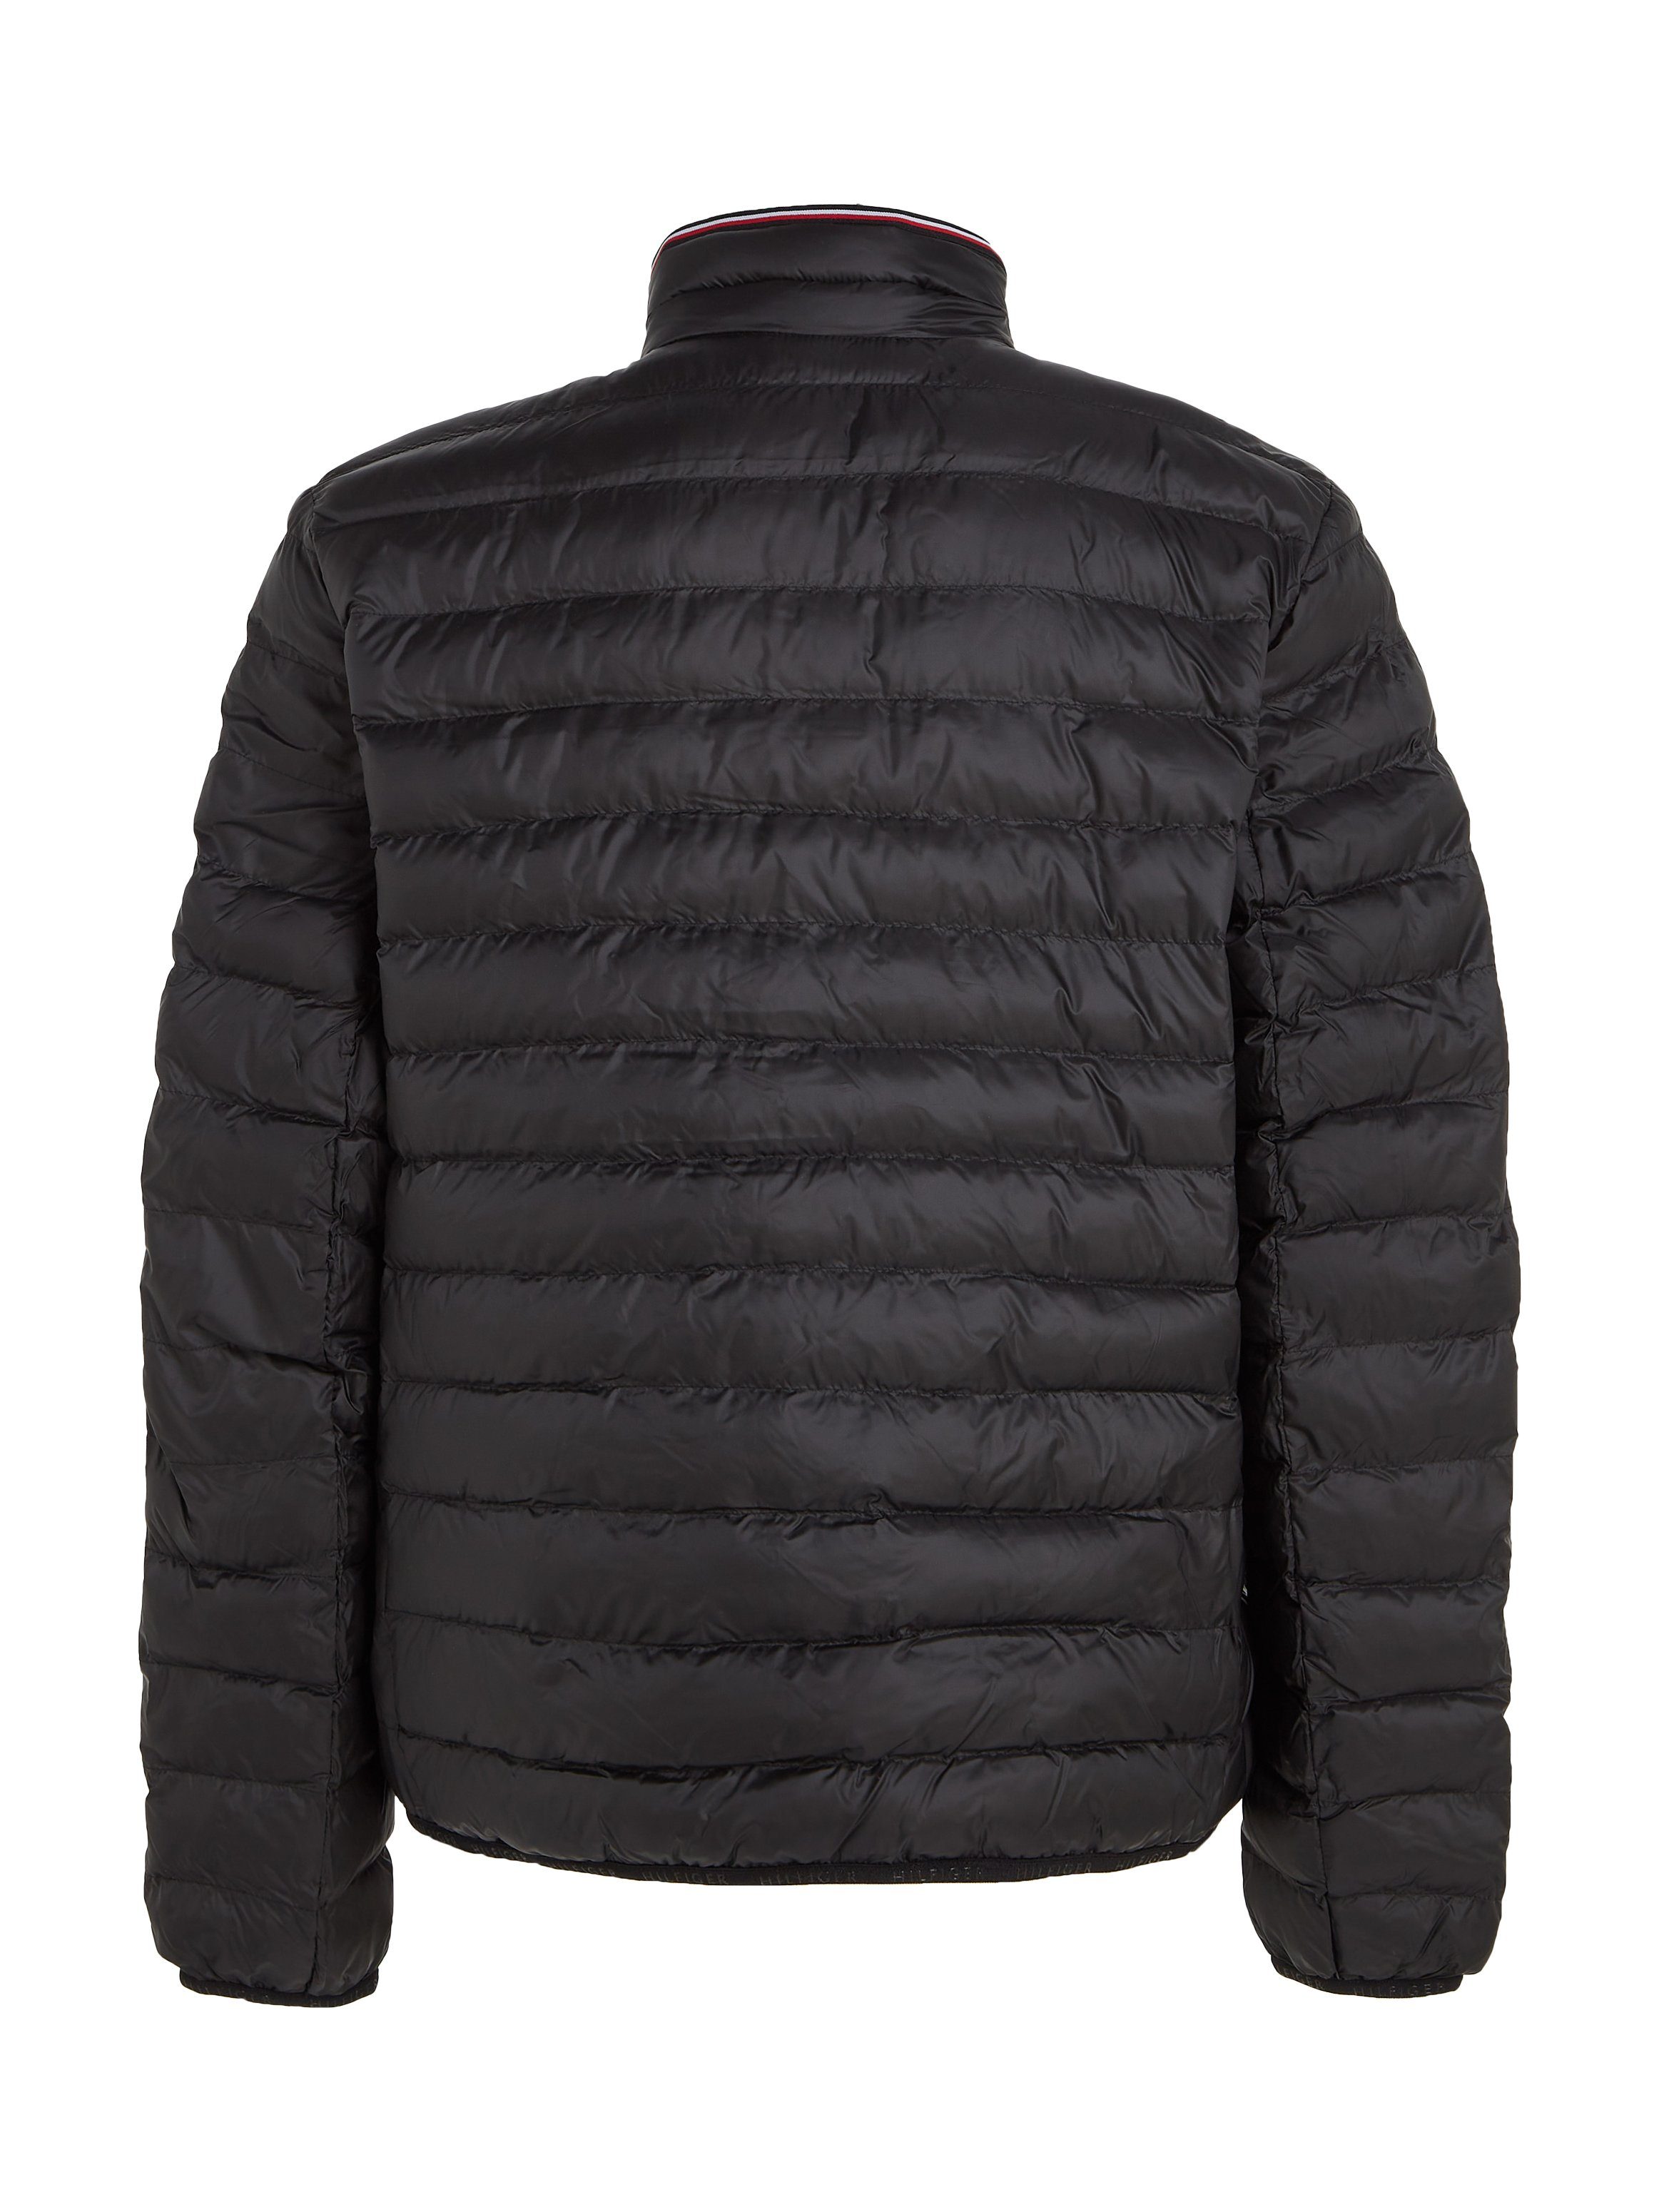 Tommy Hilfiger Steppjacke CORE black JACKET PACKABLE RECYCLED